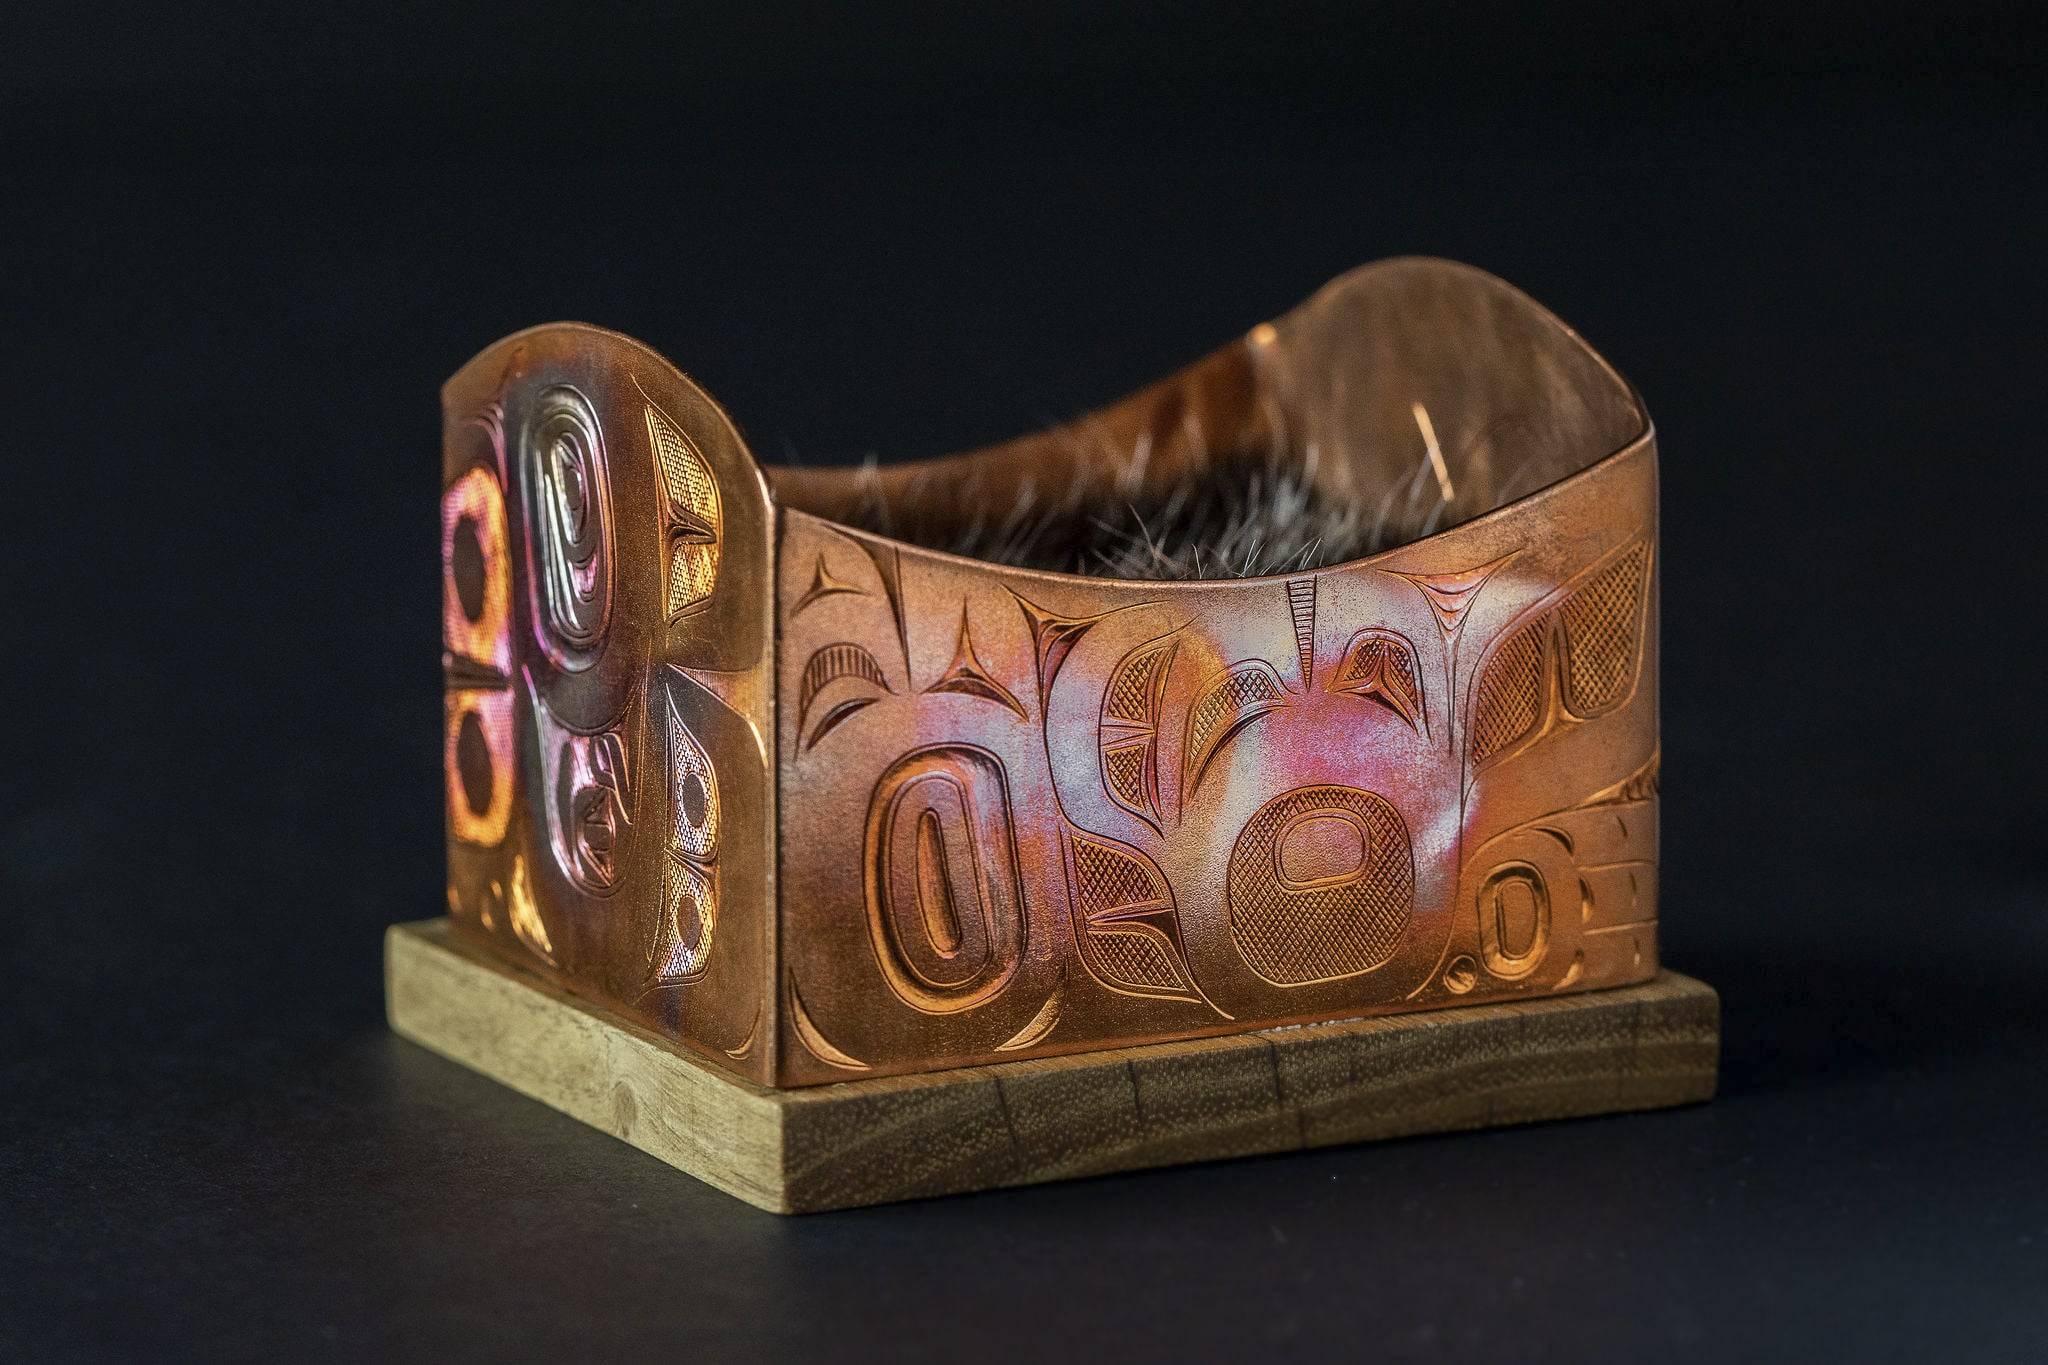 Ch’áak’ Aanyádi” (The High Caste Eagle) by Jerrod Galanin won Best of Show and Best of Carving and Sculpture Category in Sealaska Heritage Institute’s 2020 Juried Art Competition. (Courtesy Photo | SHI)